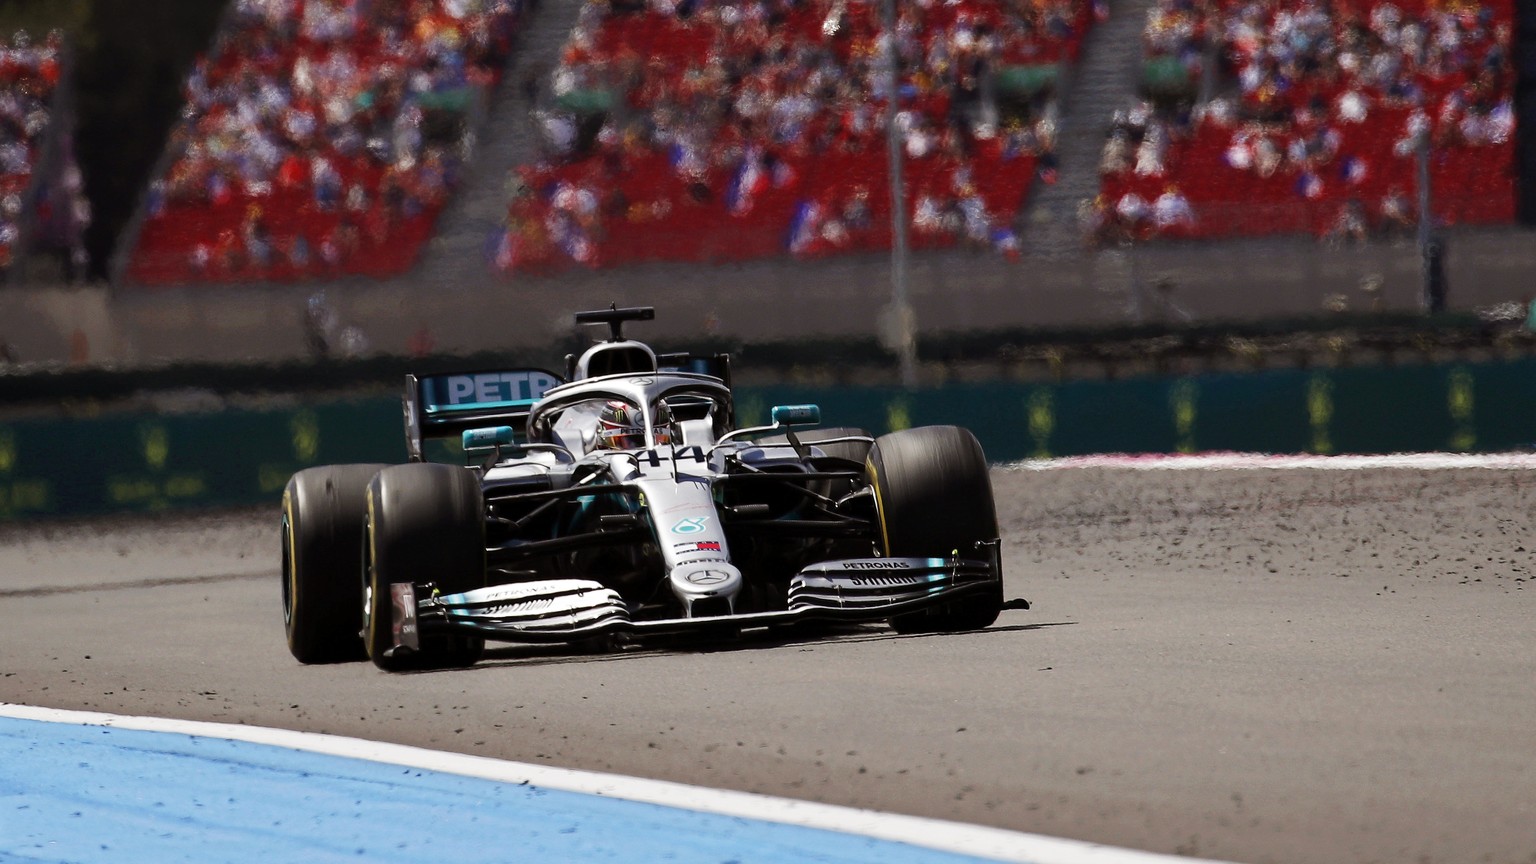 epa07668225 British Formula One driver Lewis Hamilton of Mercedes AMG GP in action during the 2019 French Formula One Grand Prix at Paul Ricard circuit in Le Castellet, France, 23 June 2019. EPA/YOAN  ...